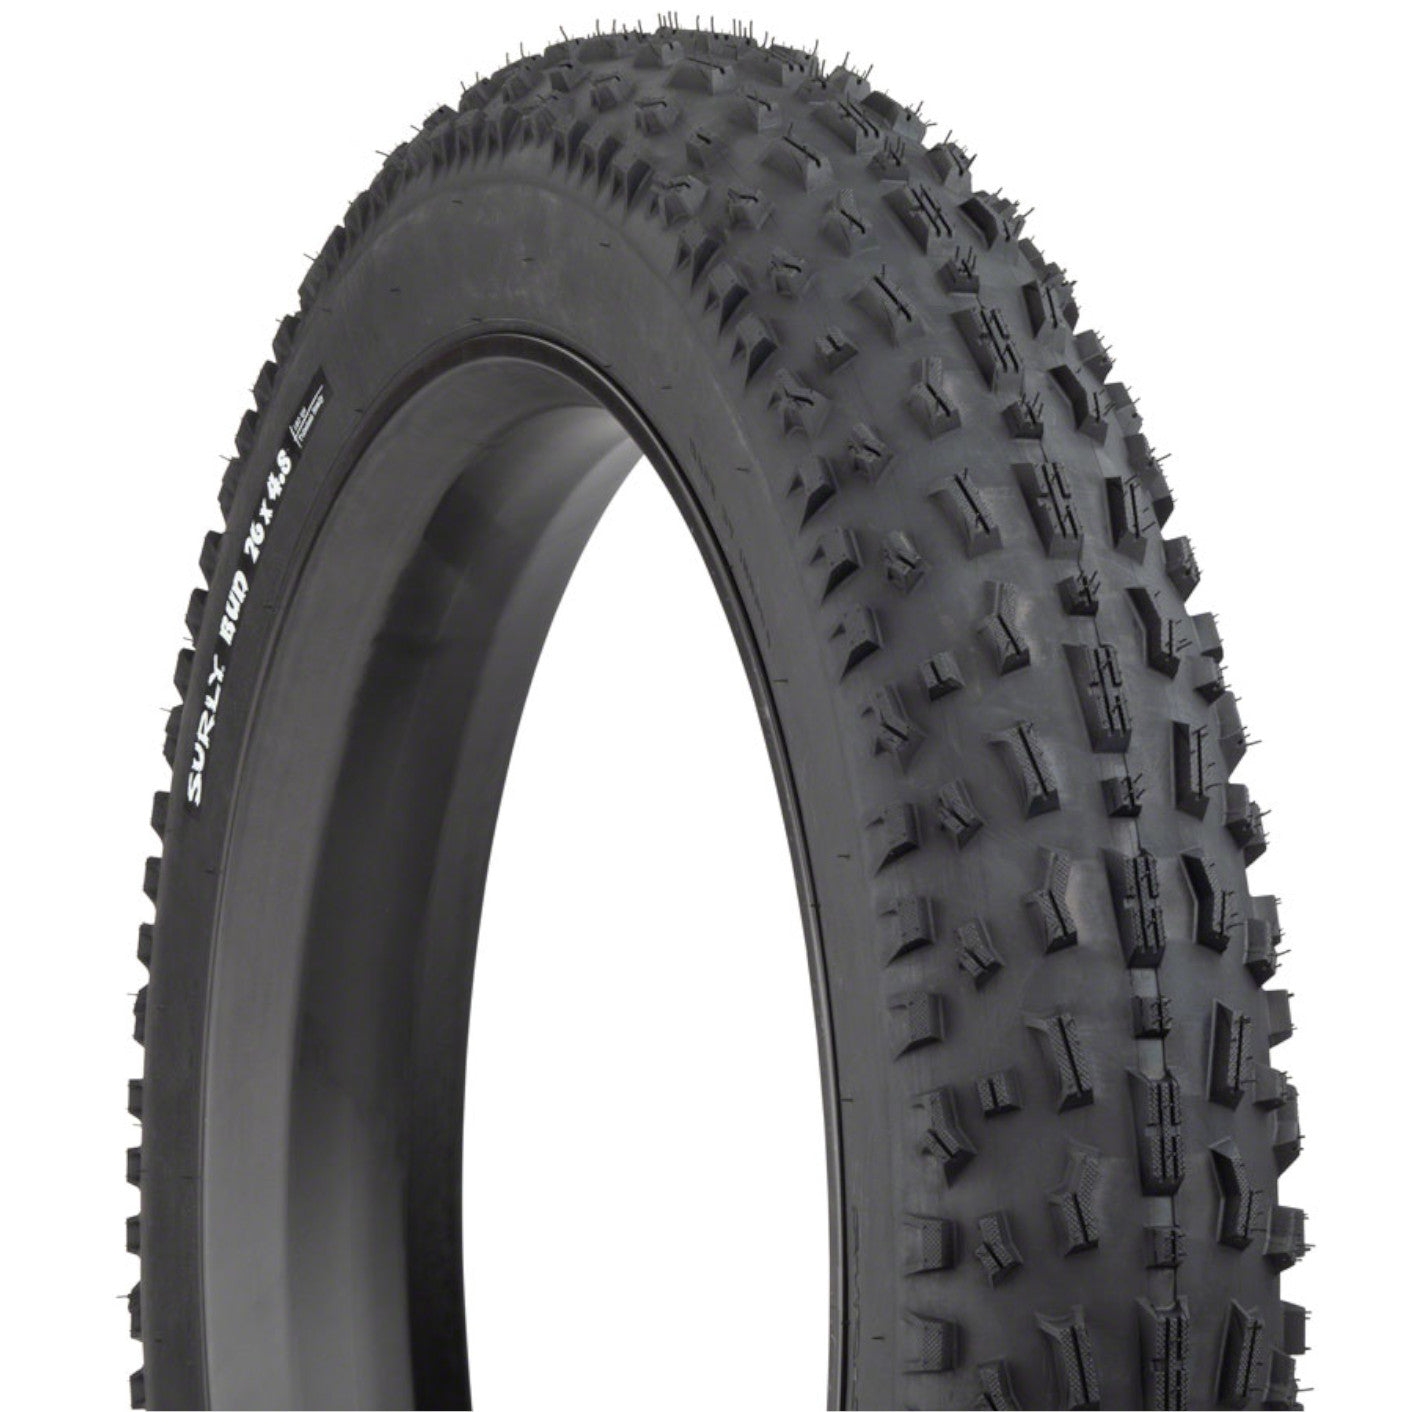 New Surly Bud or Lou 26 x 4.8 Folding Tubeless Ready Fat Bike Tire - The Bikesmiths